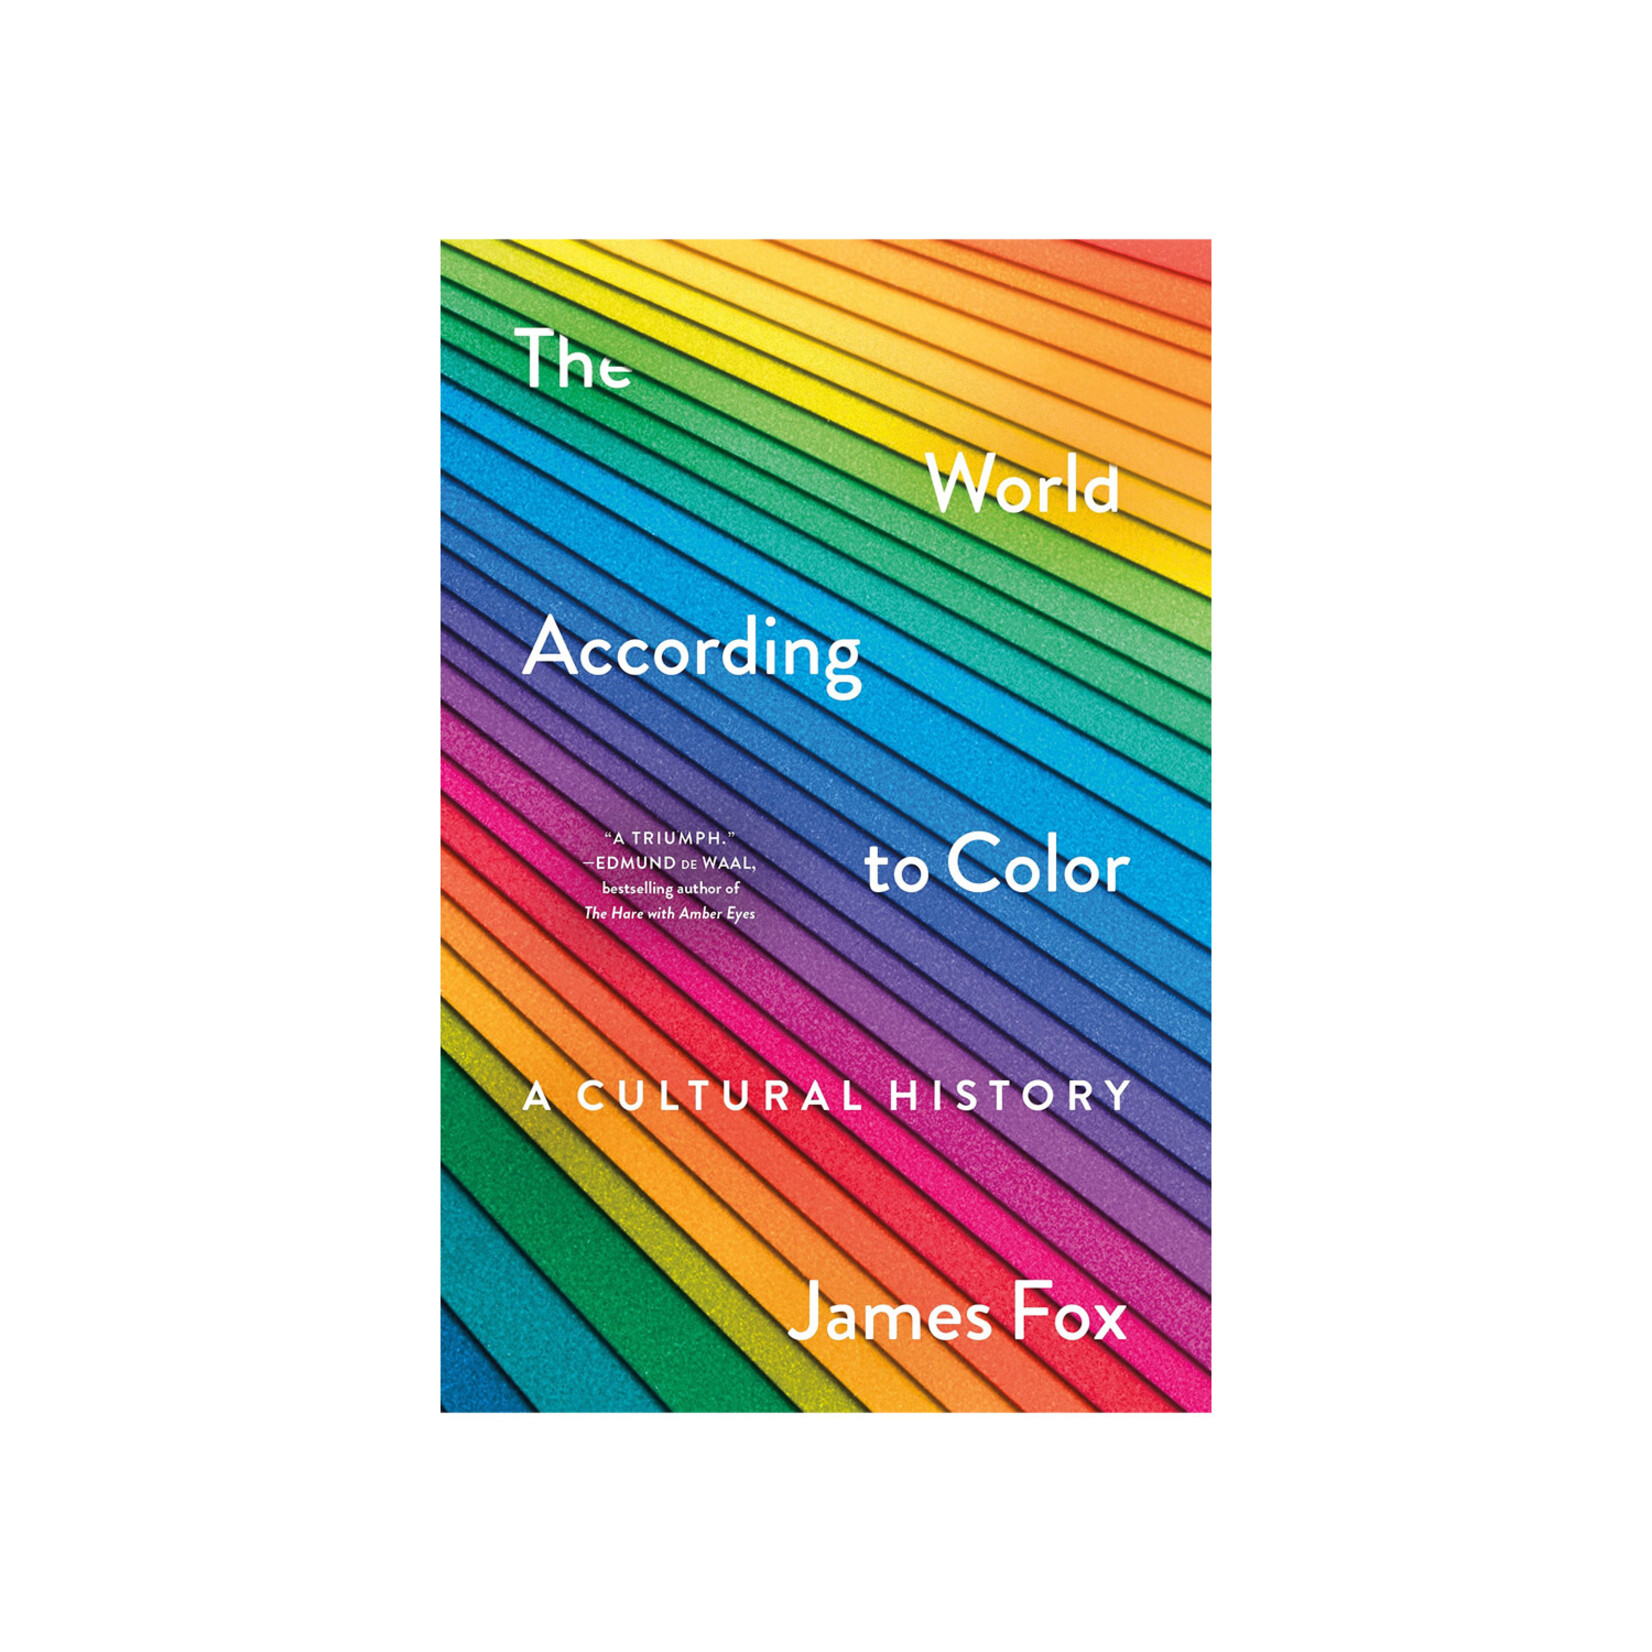 The World According to Color